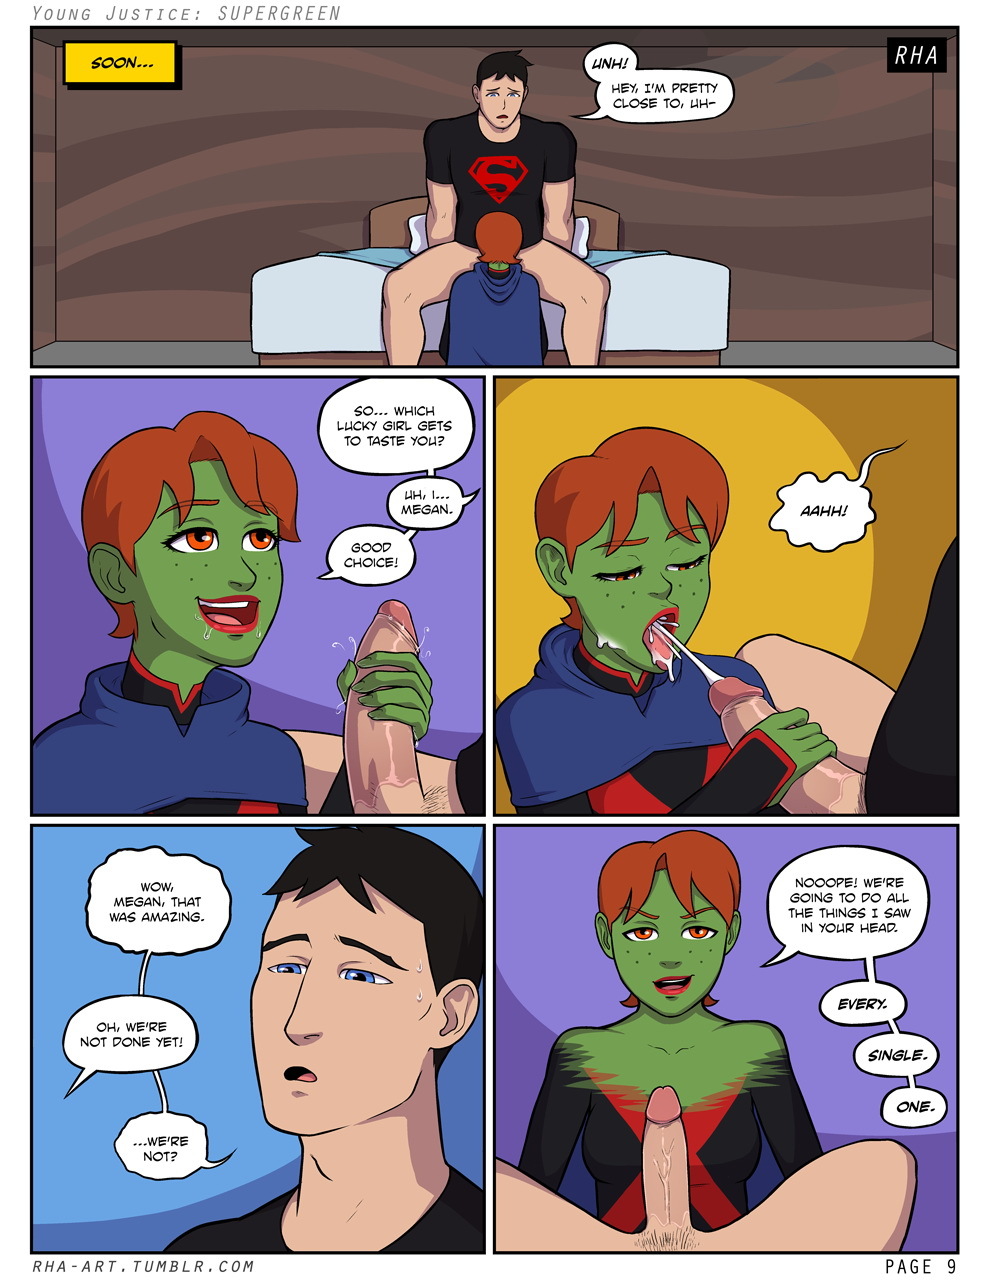 Young Justice - Supergreen - Page 10